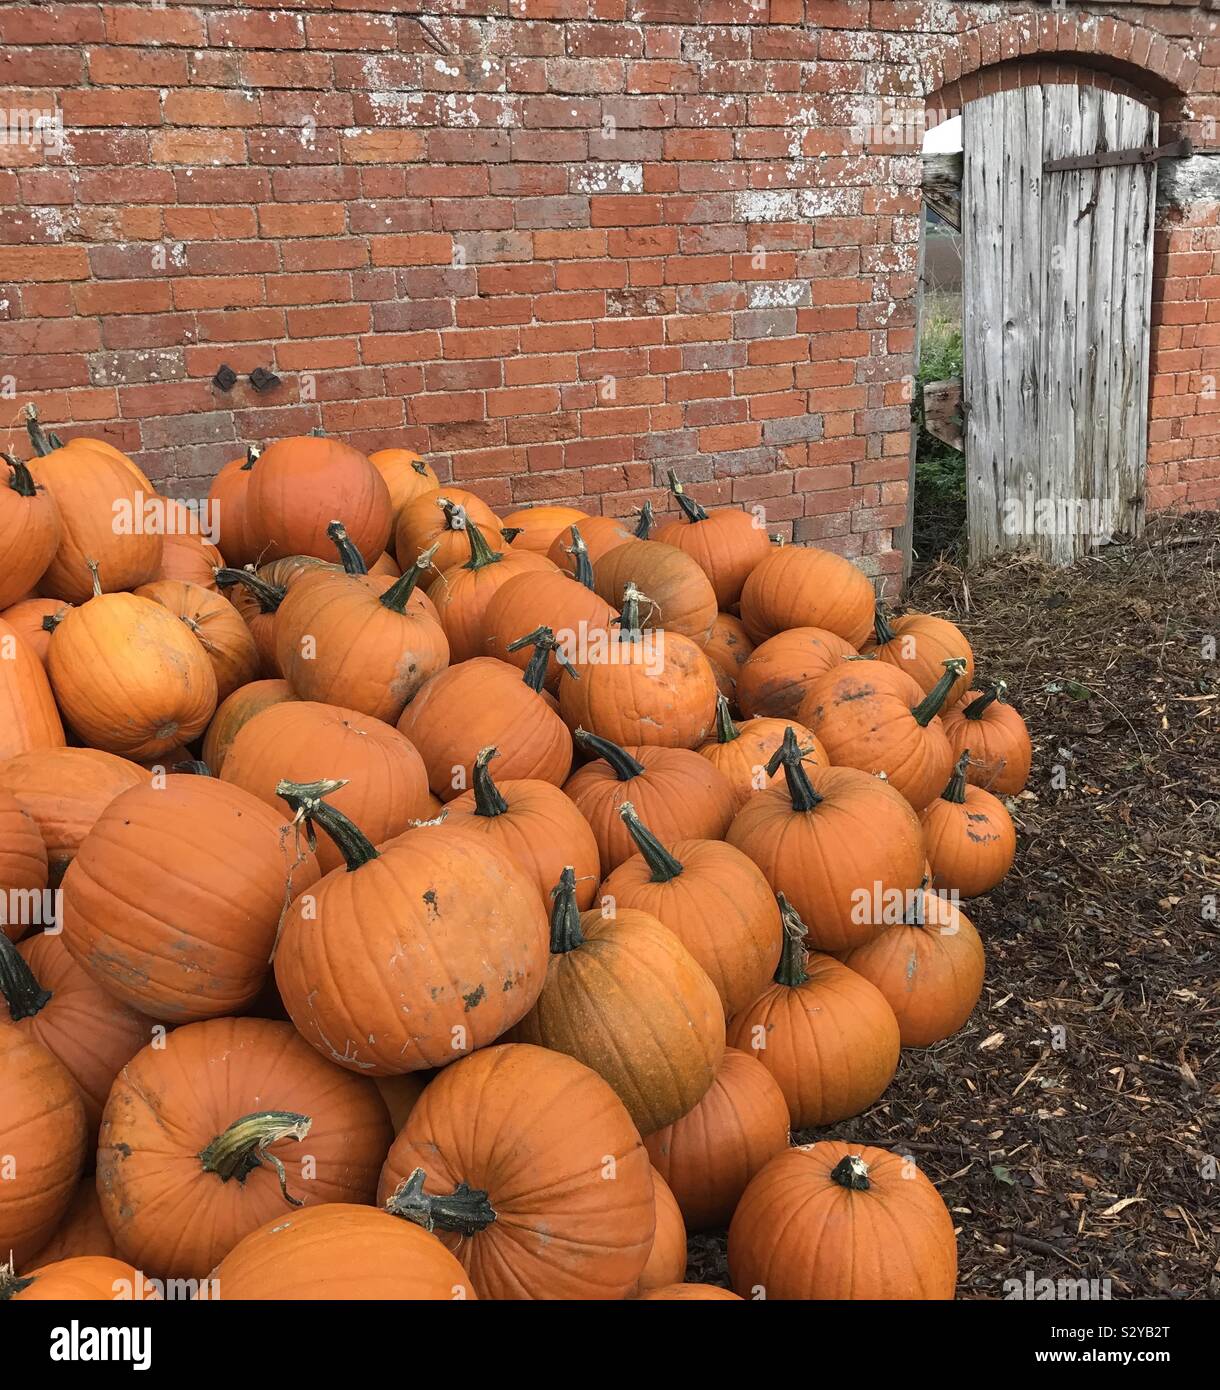 Pile of pumpkins by the wall Stock Photo